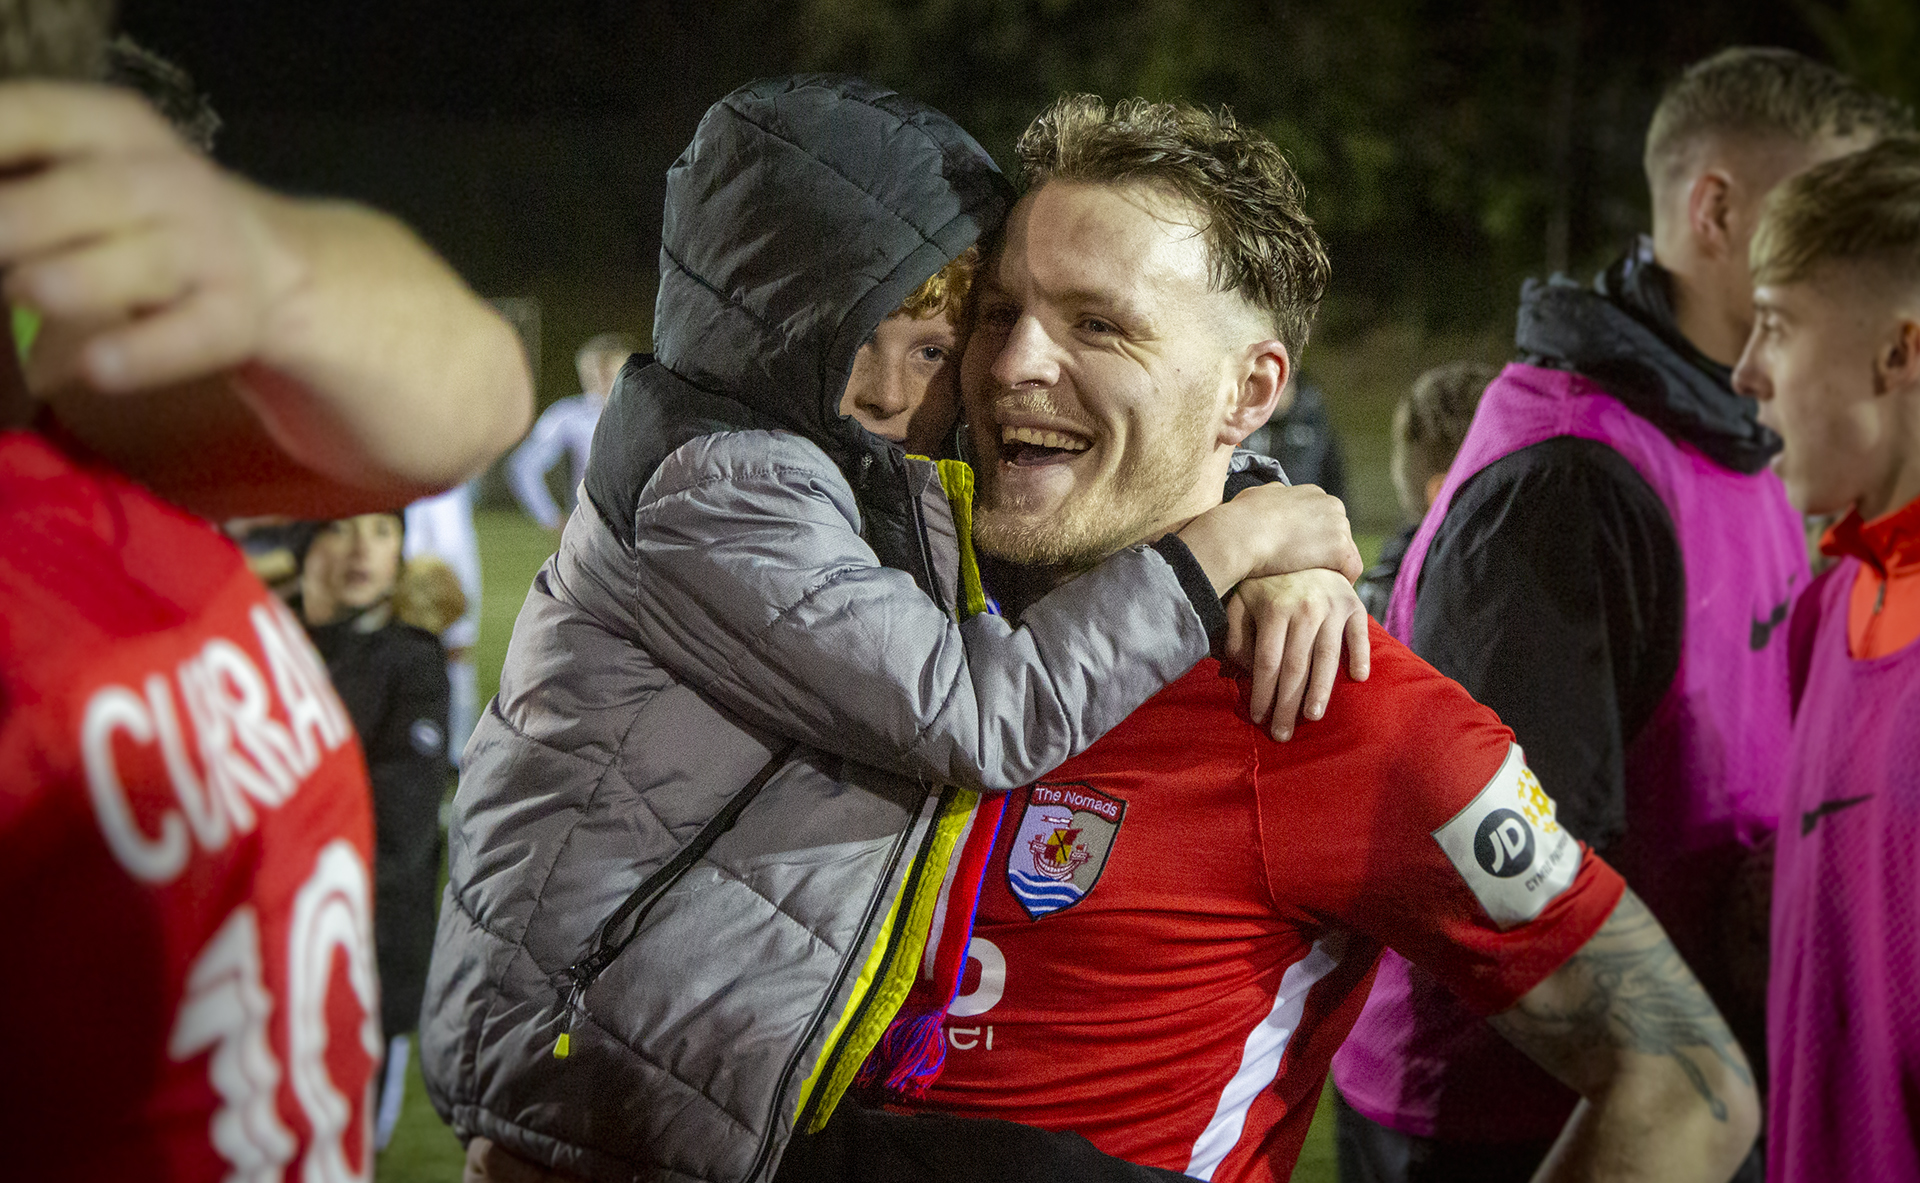 Jamie Insall celebrates The Nomads' Nathaniel MG Cup victory with son Finley | © NCM Media